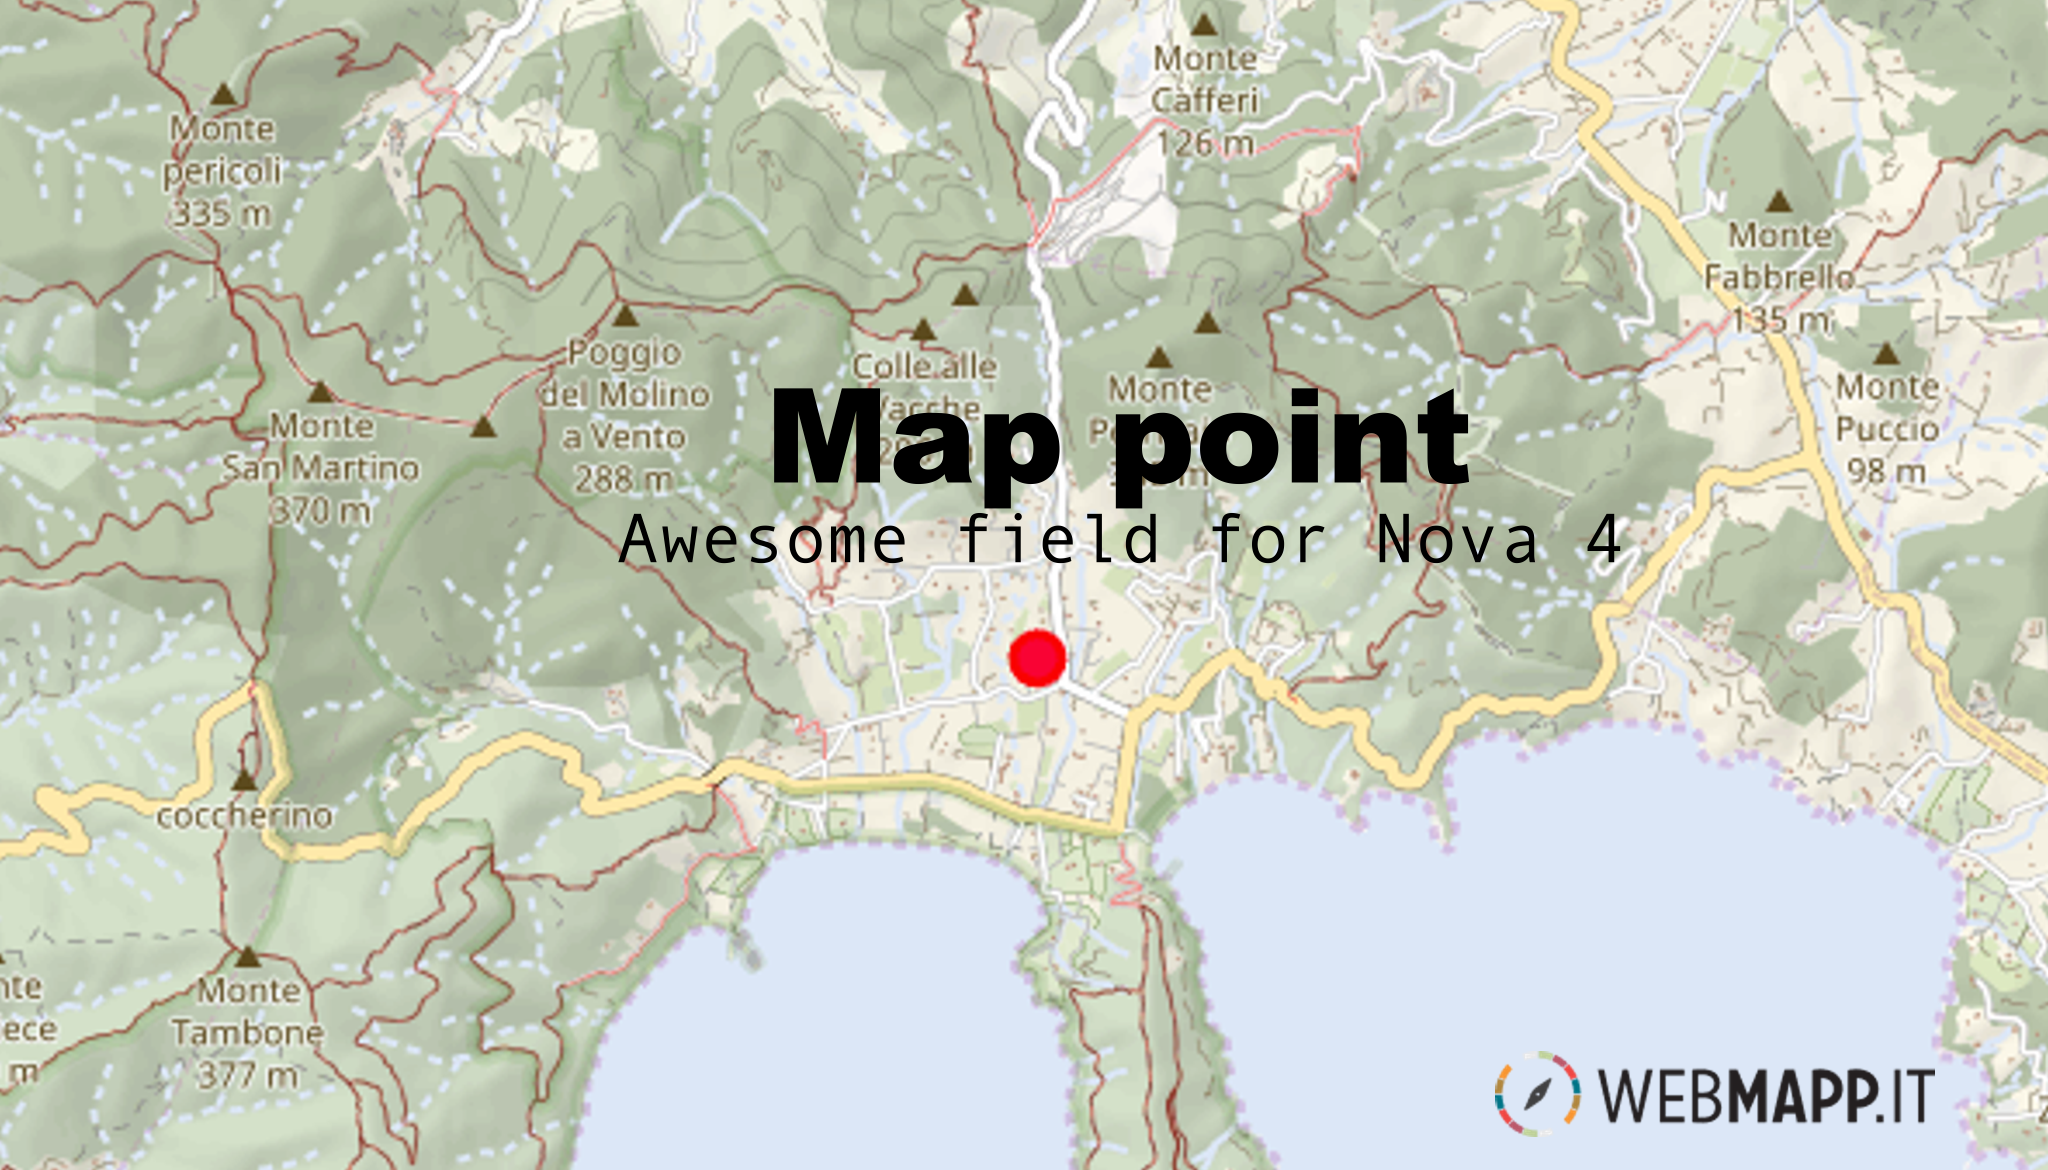 Map Point, awesome resource field for Nova